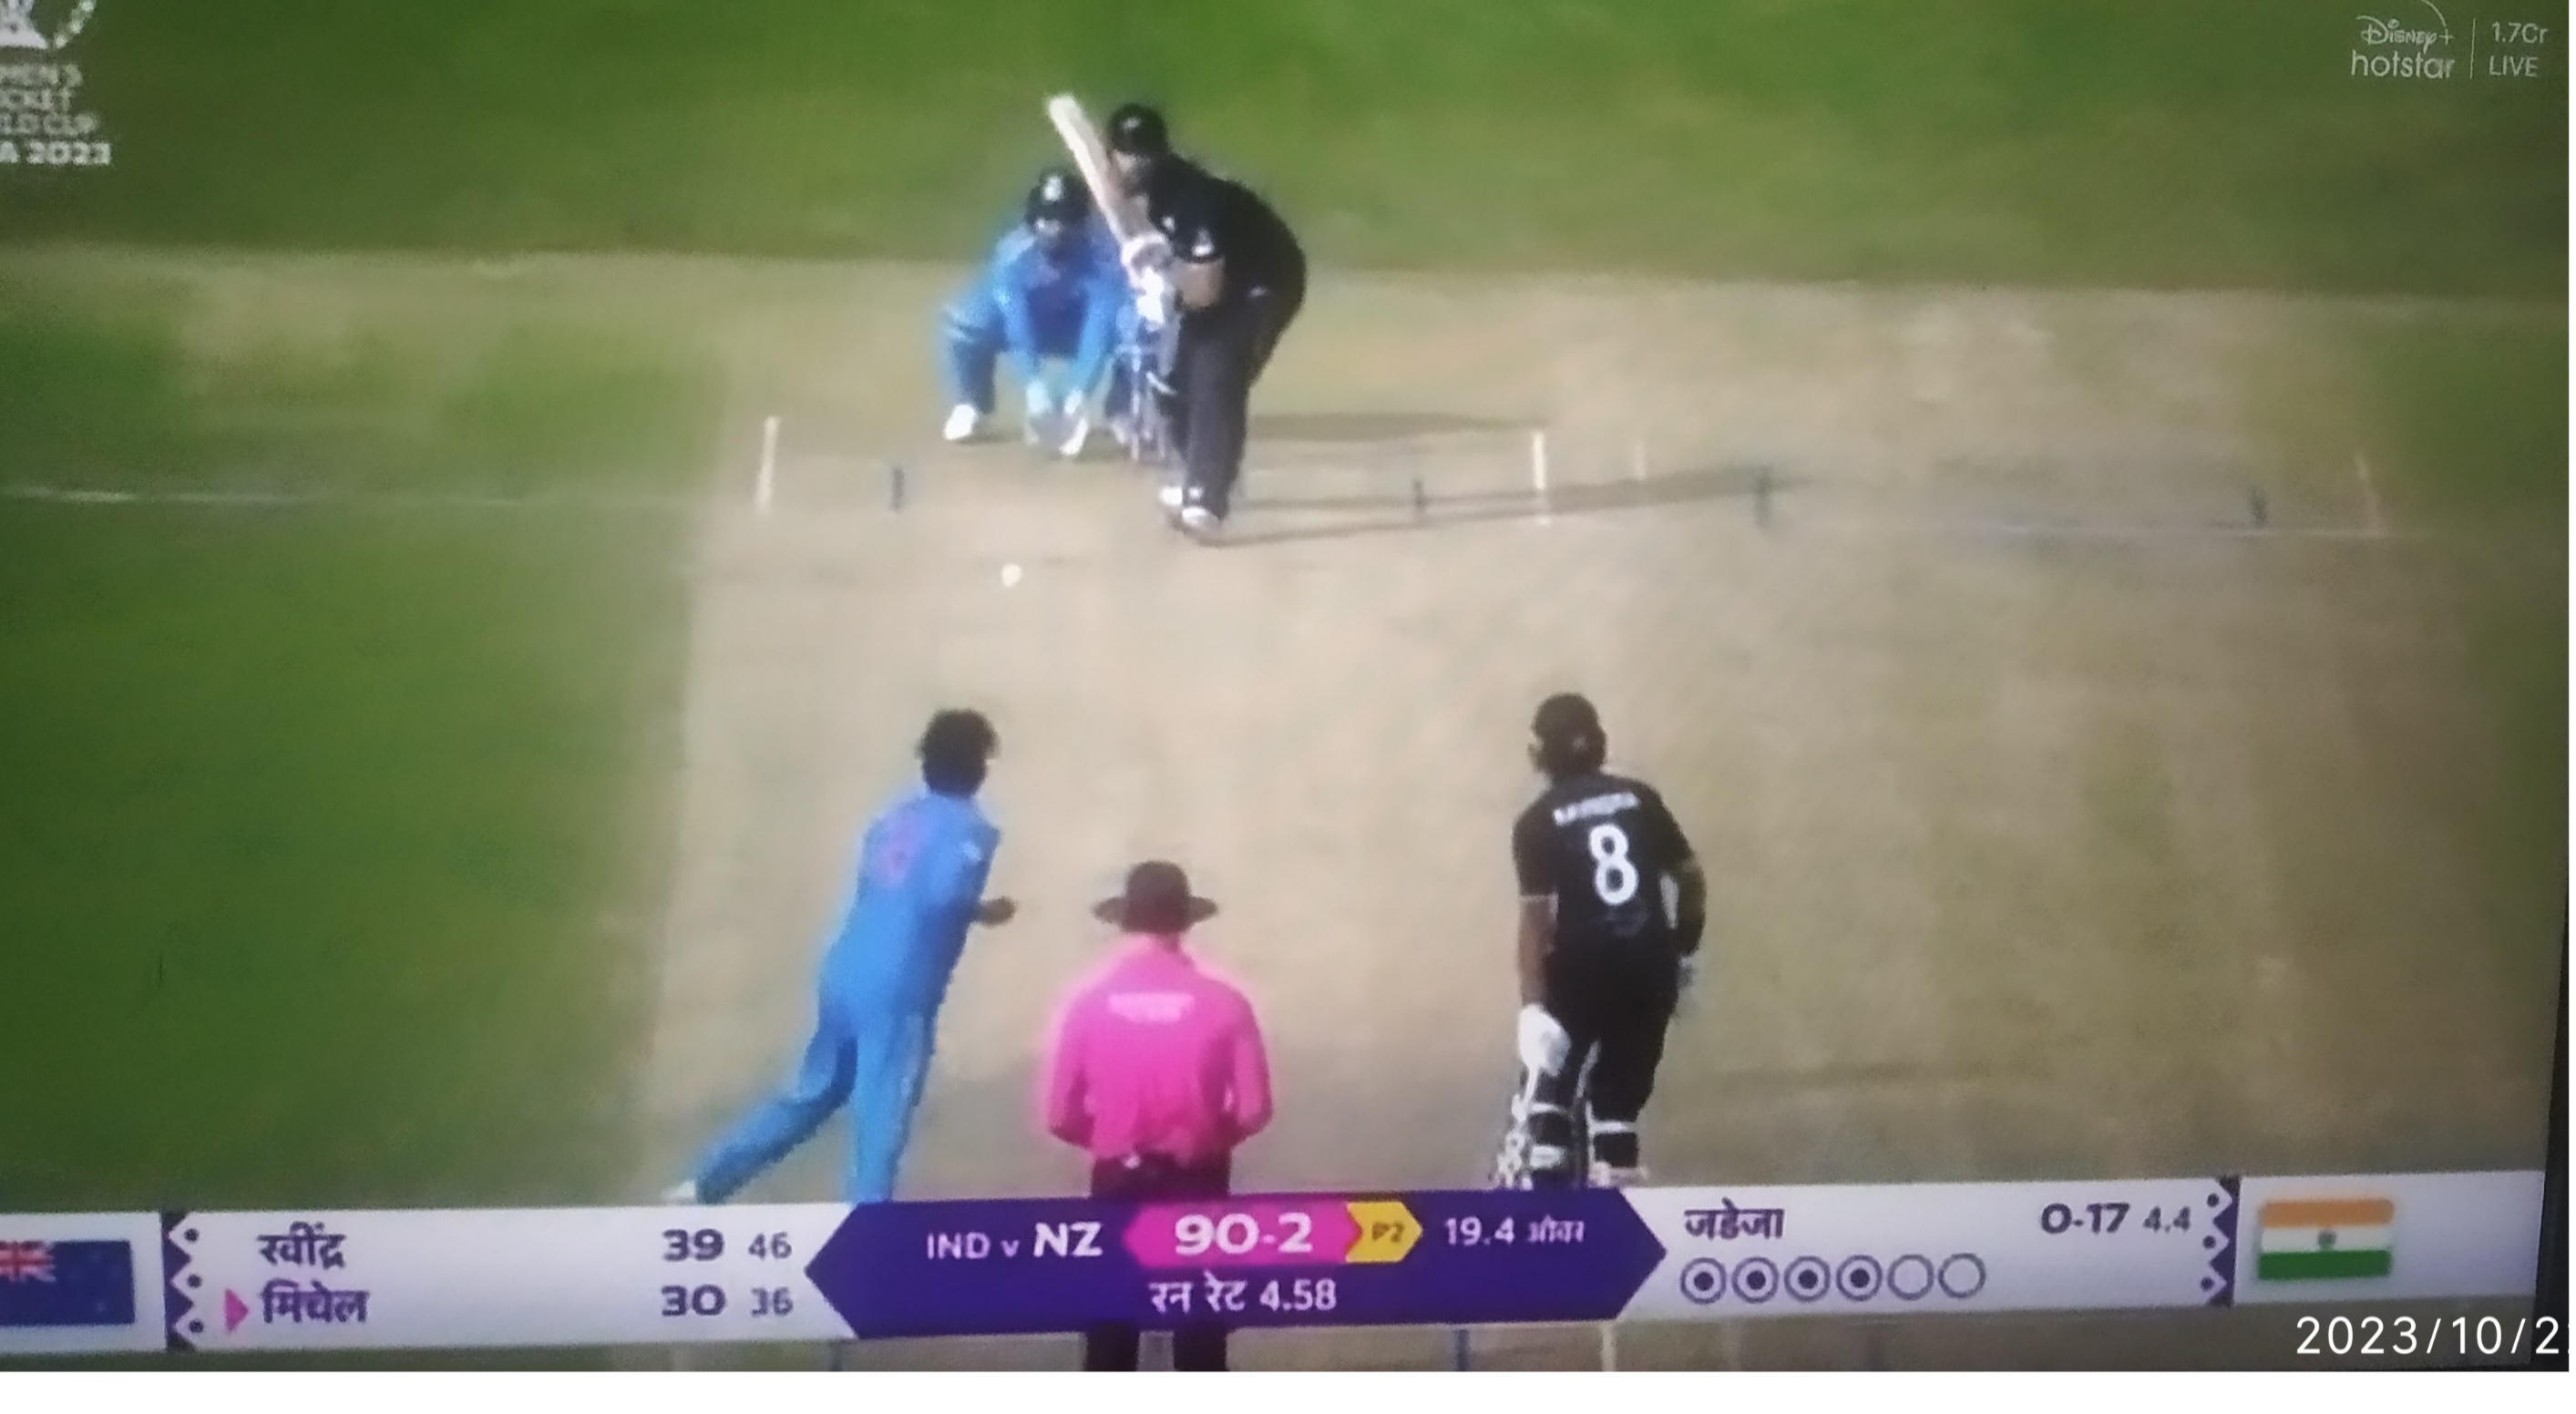 India vs NZ World Cup 2023